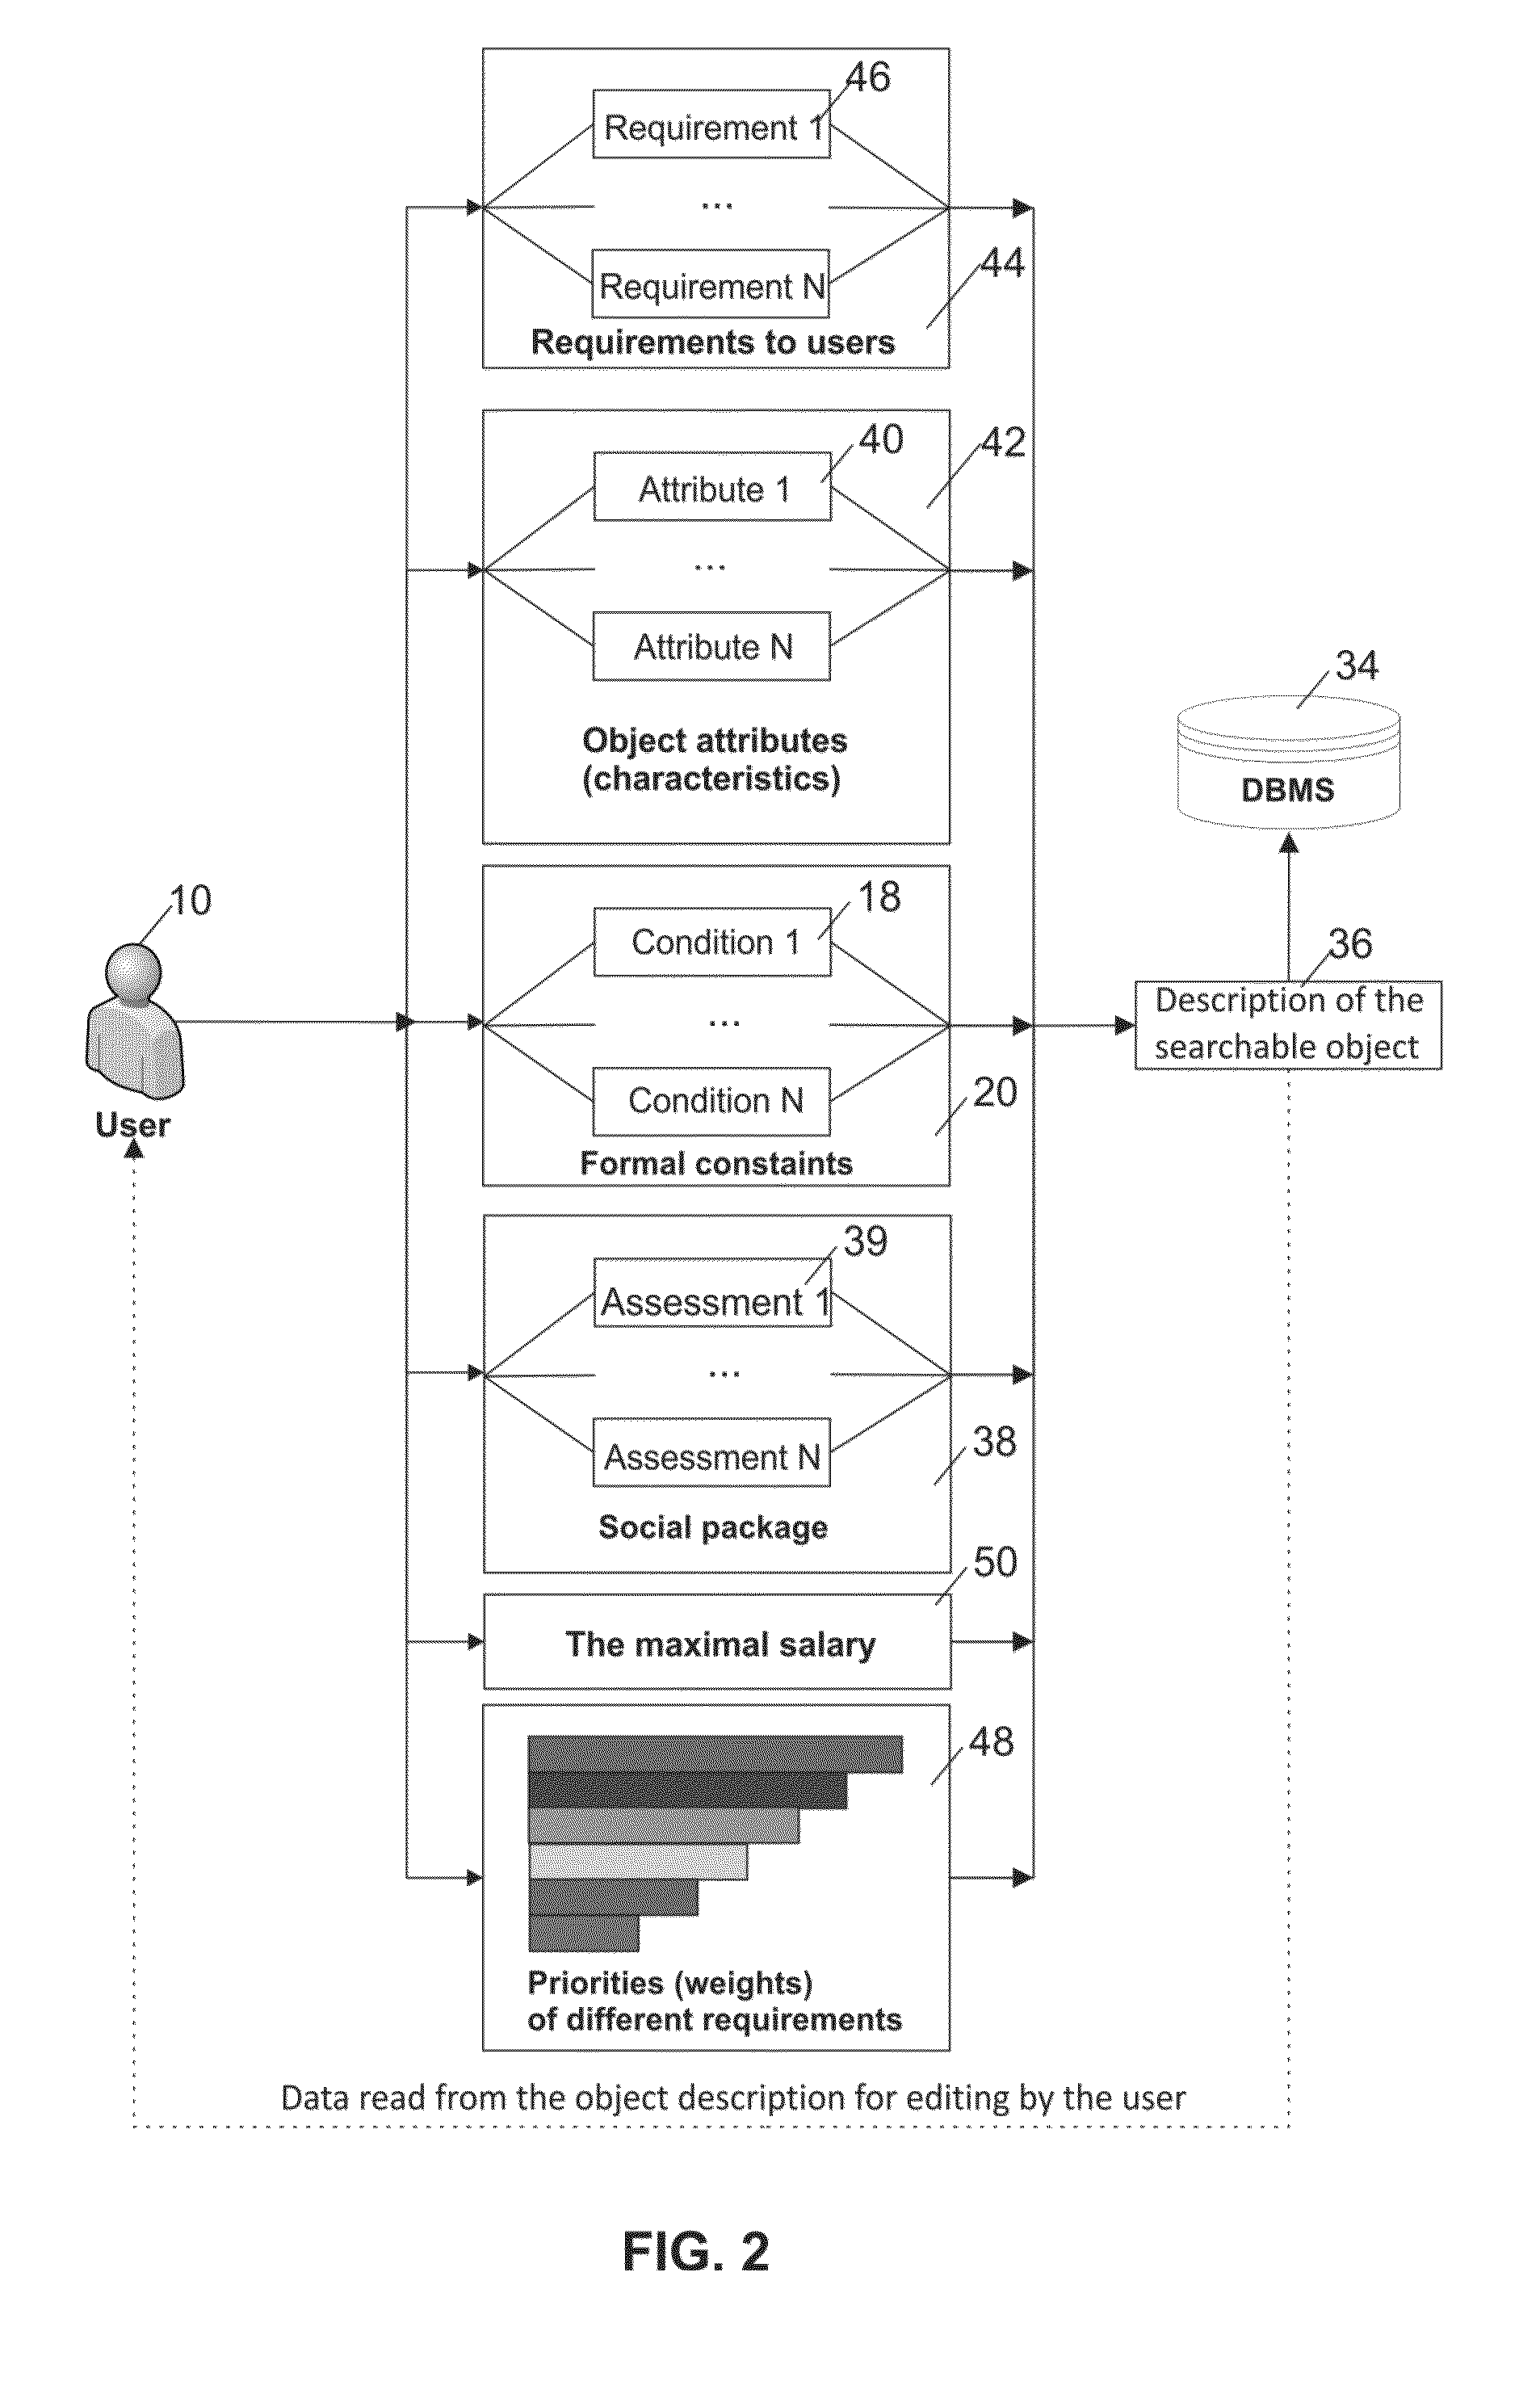 Multi-attribute search system and method for ranking objects according to their attractiveness